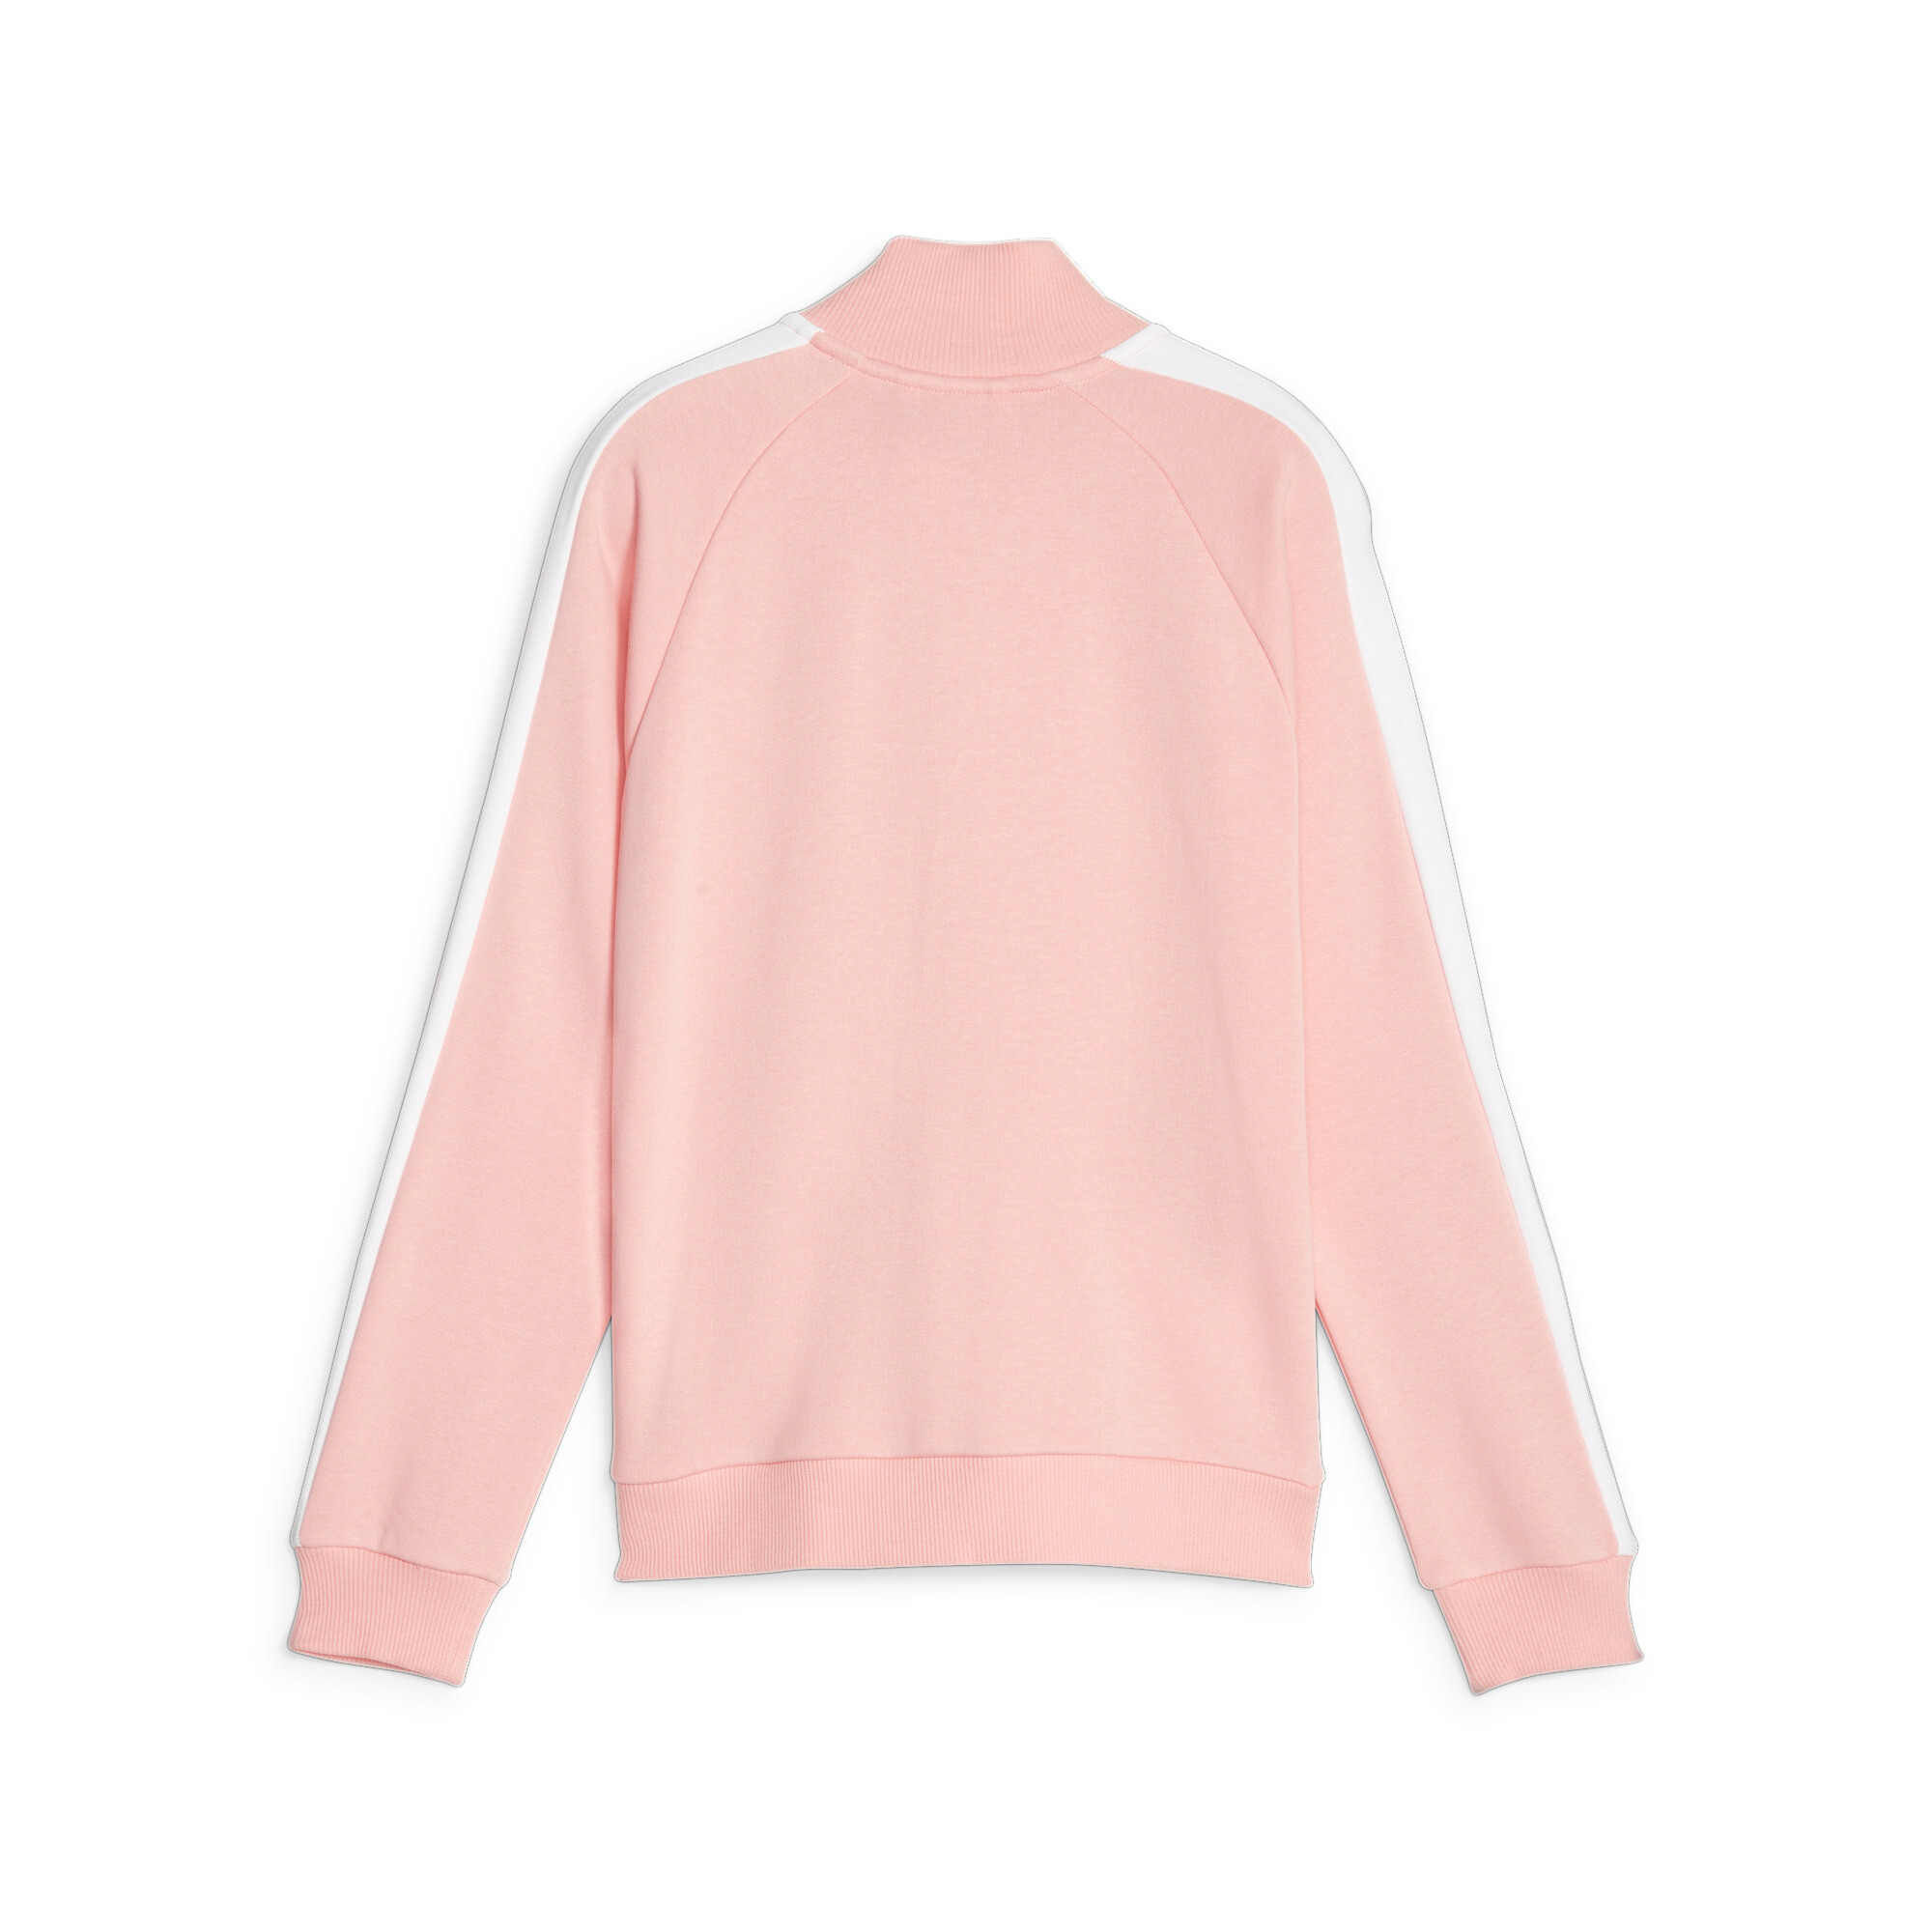 PUMA Classics T7 Track Jacket In Pink, Size 9-10 Youth